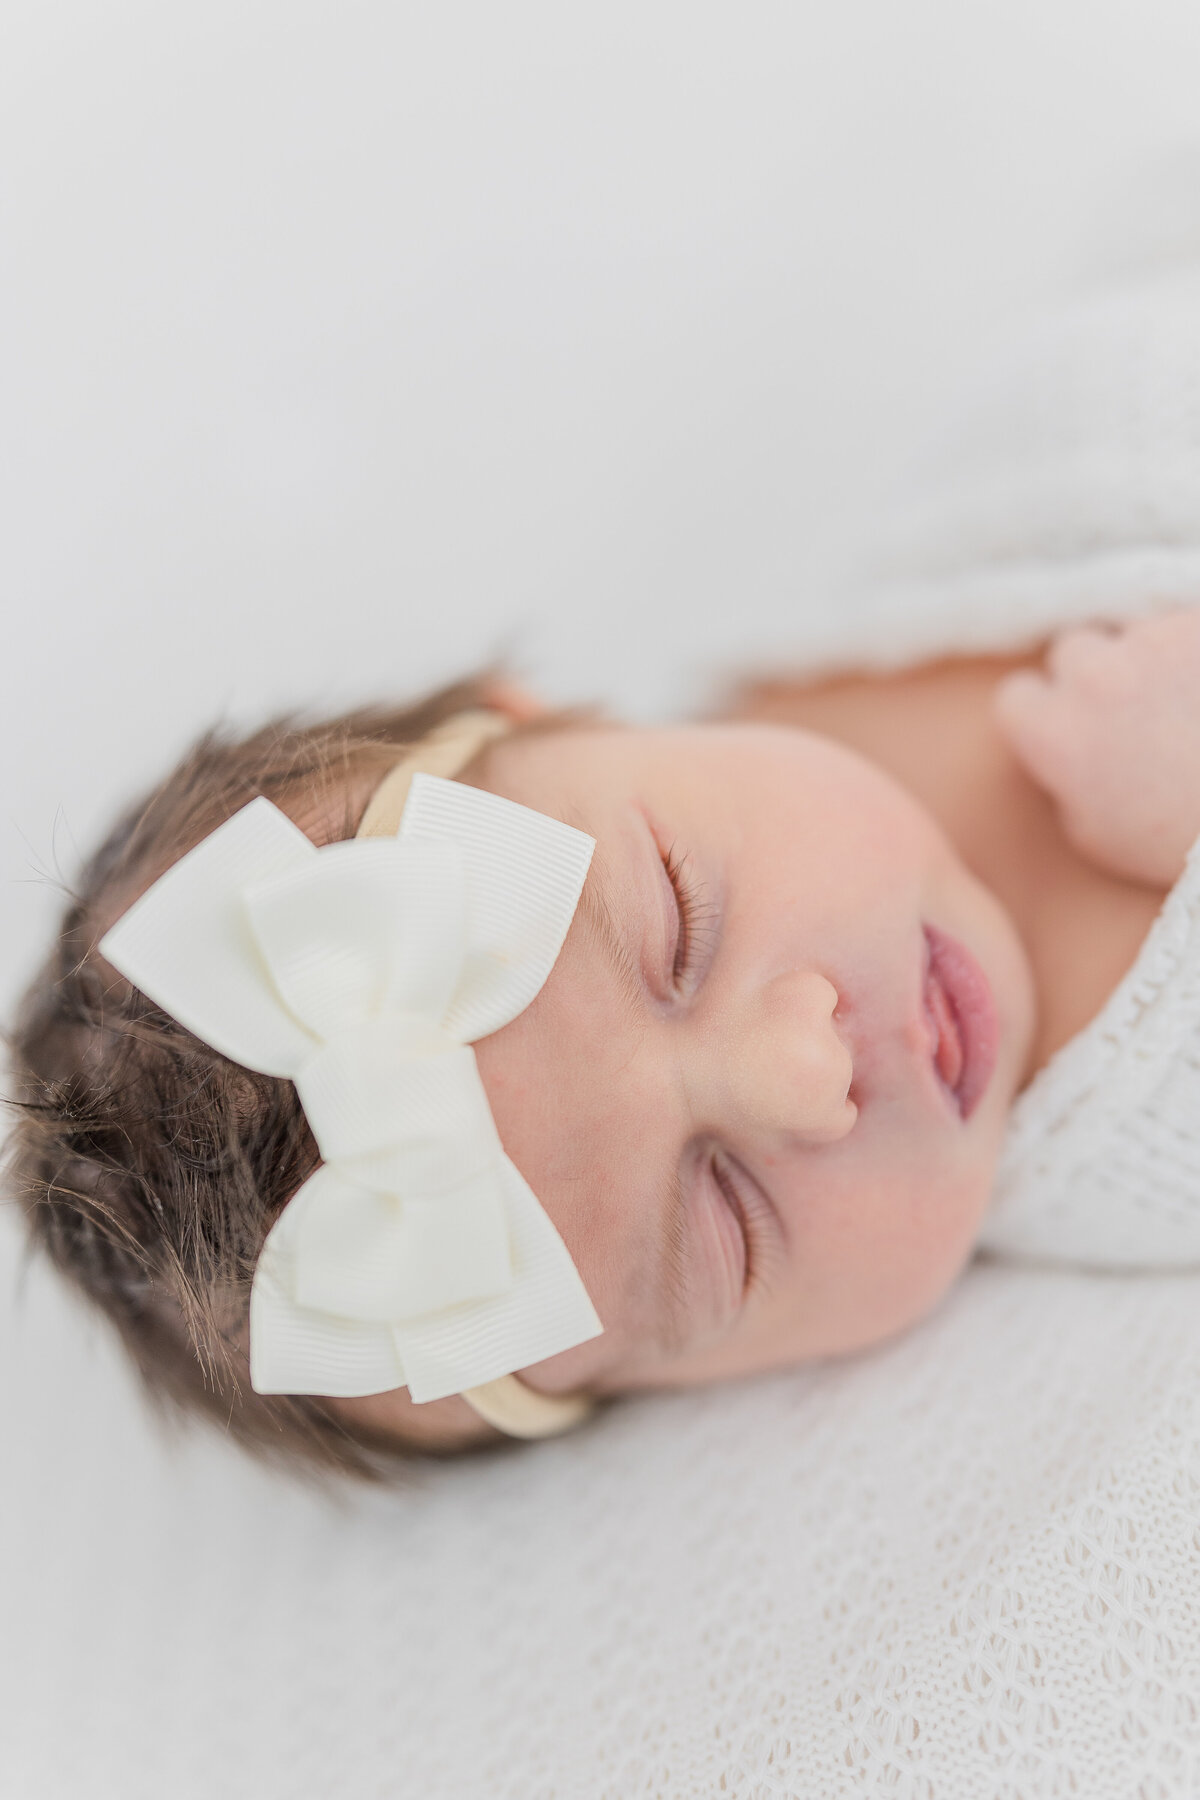 Close up image of newborn baby girl wearing a white bow